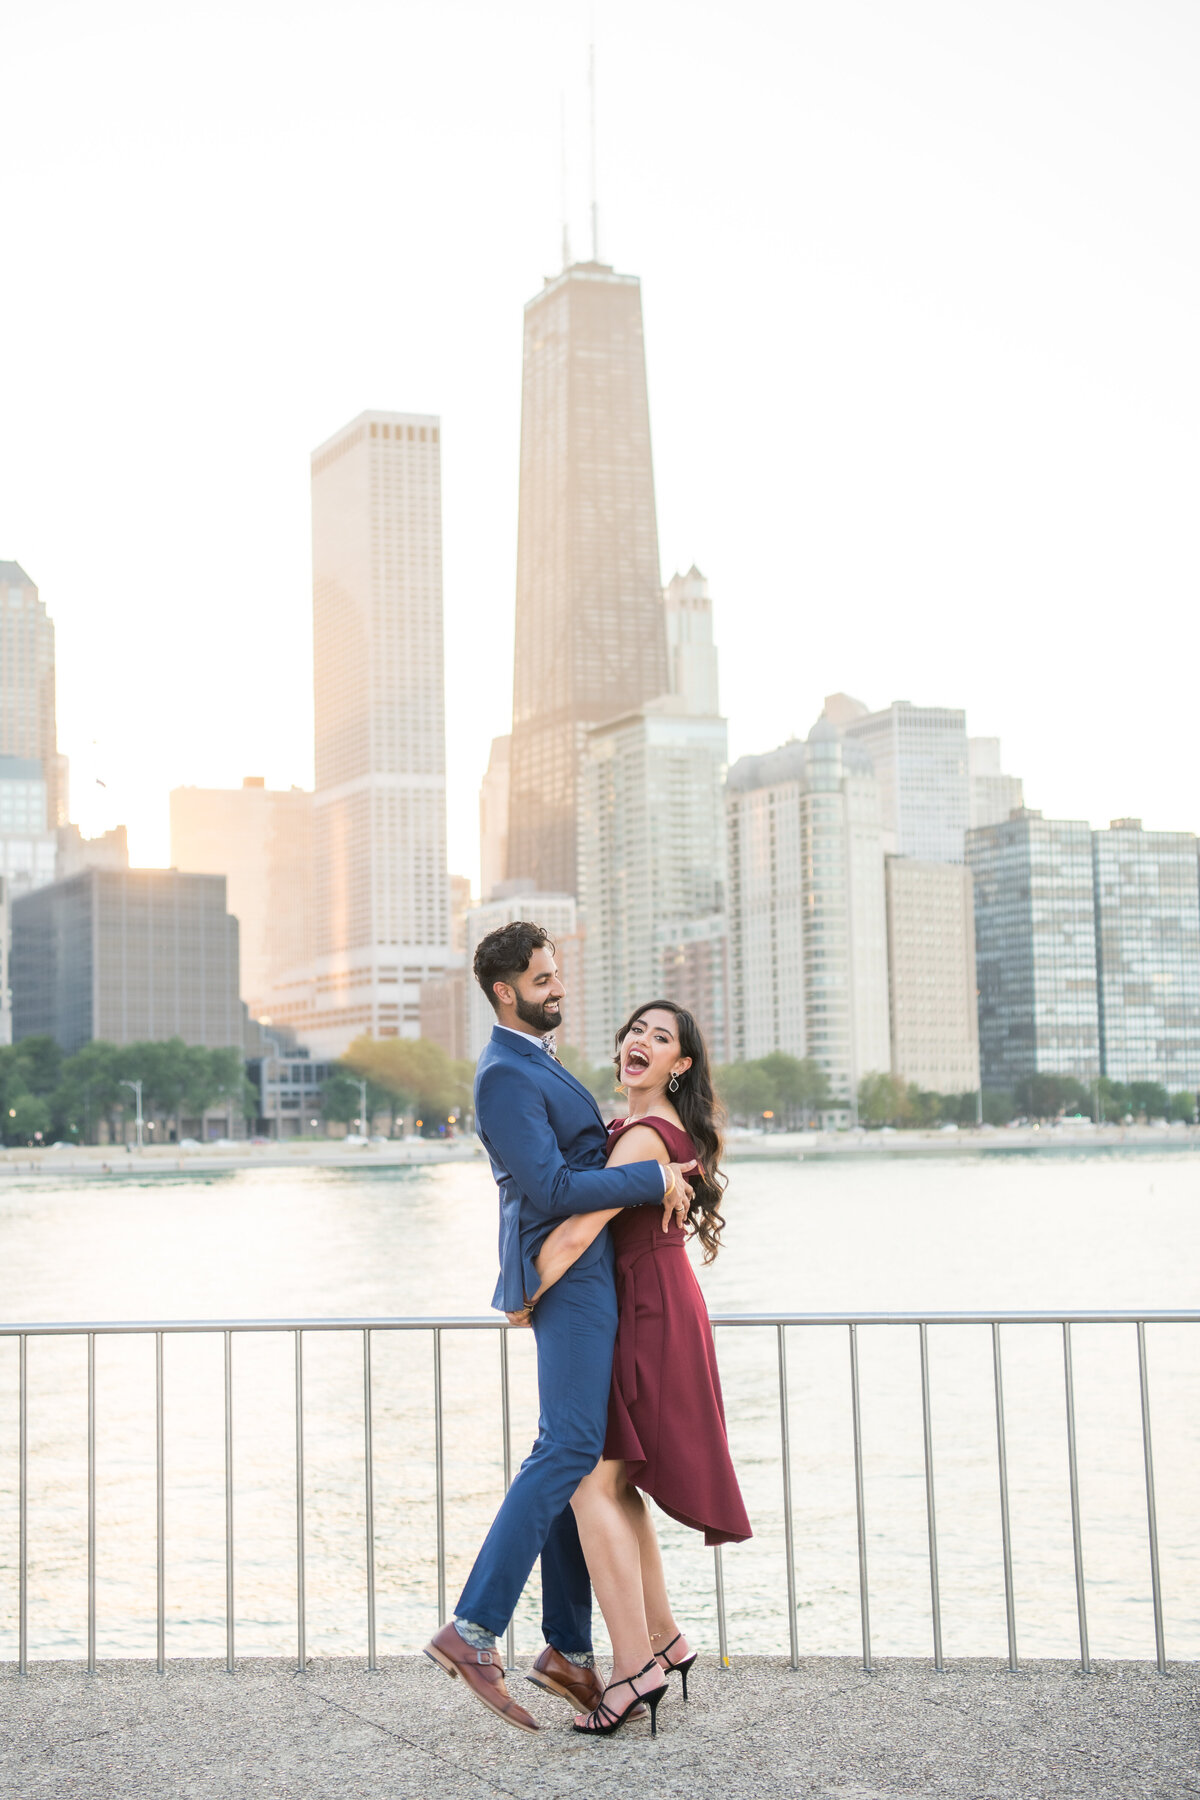 maha_studios_wedding_photography_chicago_new_york_california_sophisticated_and_vibrant_photography_honoring_modern_south_asian_and_multicultural_weddings10